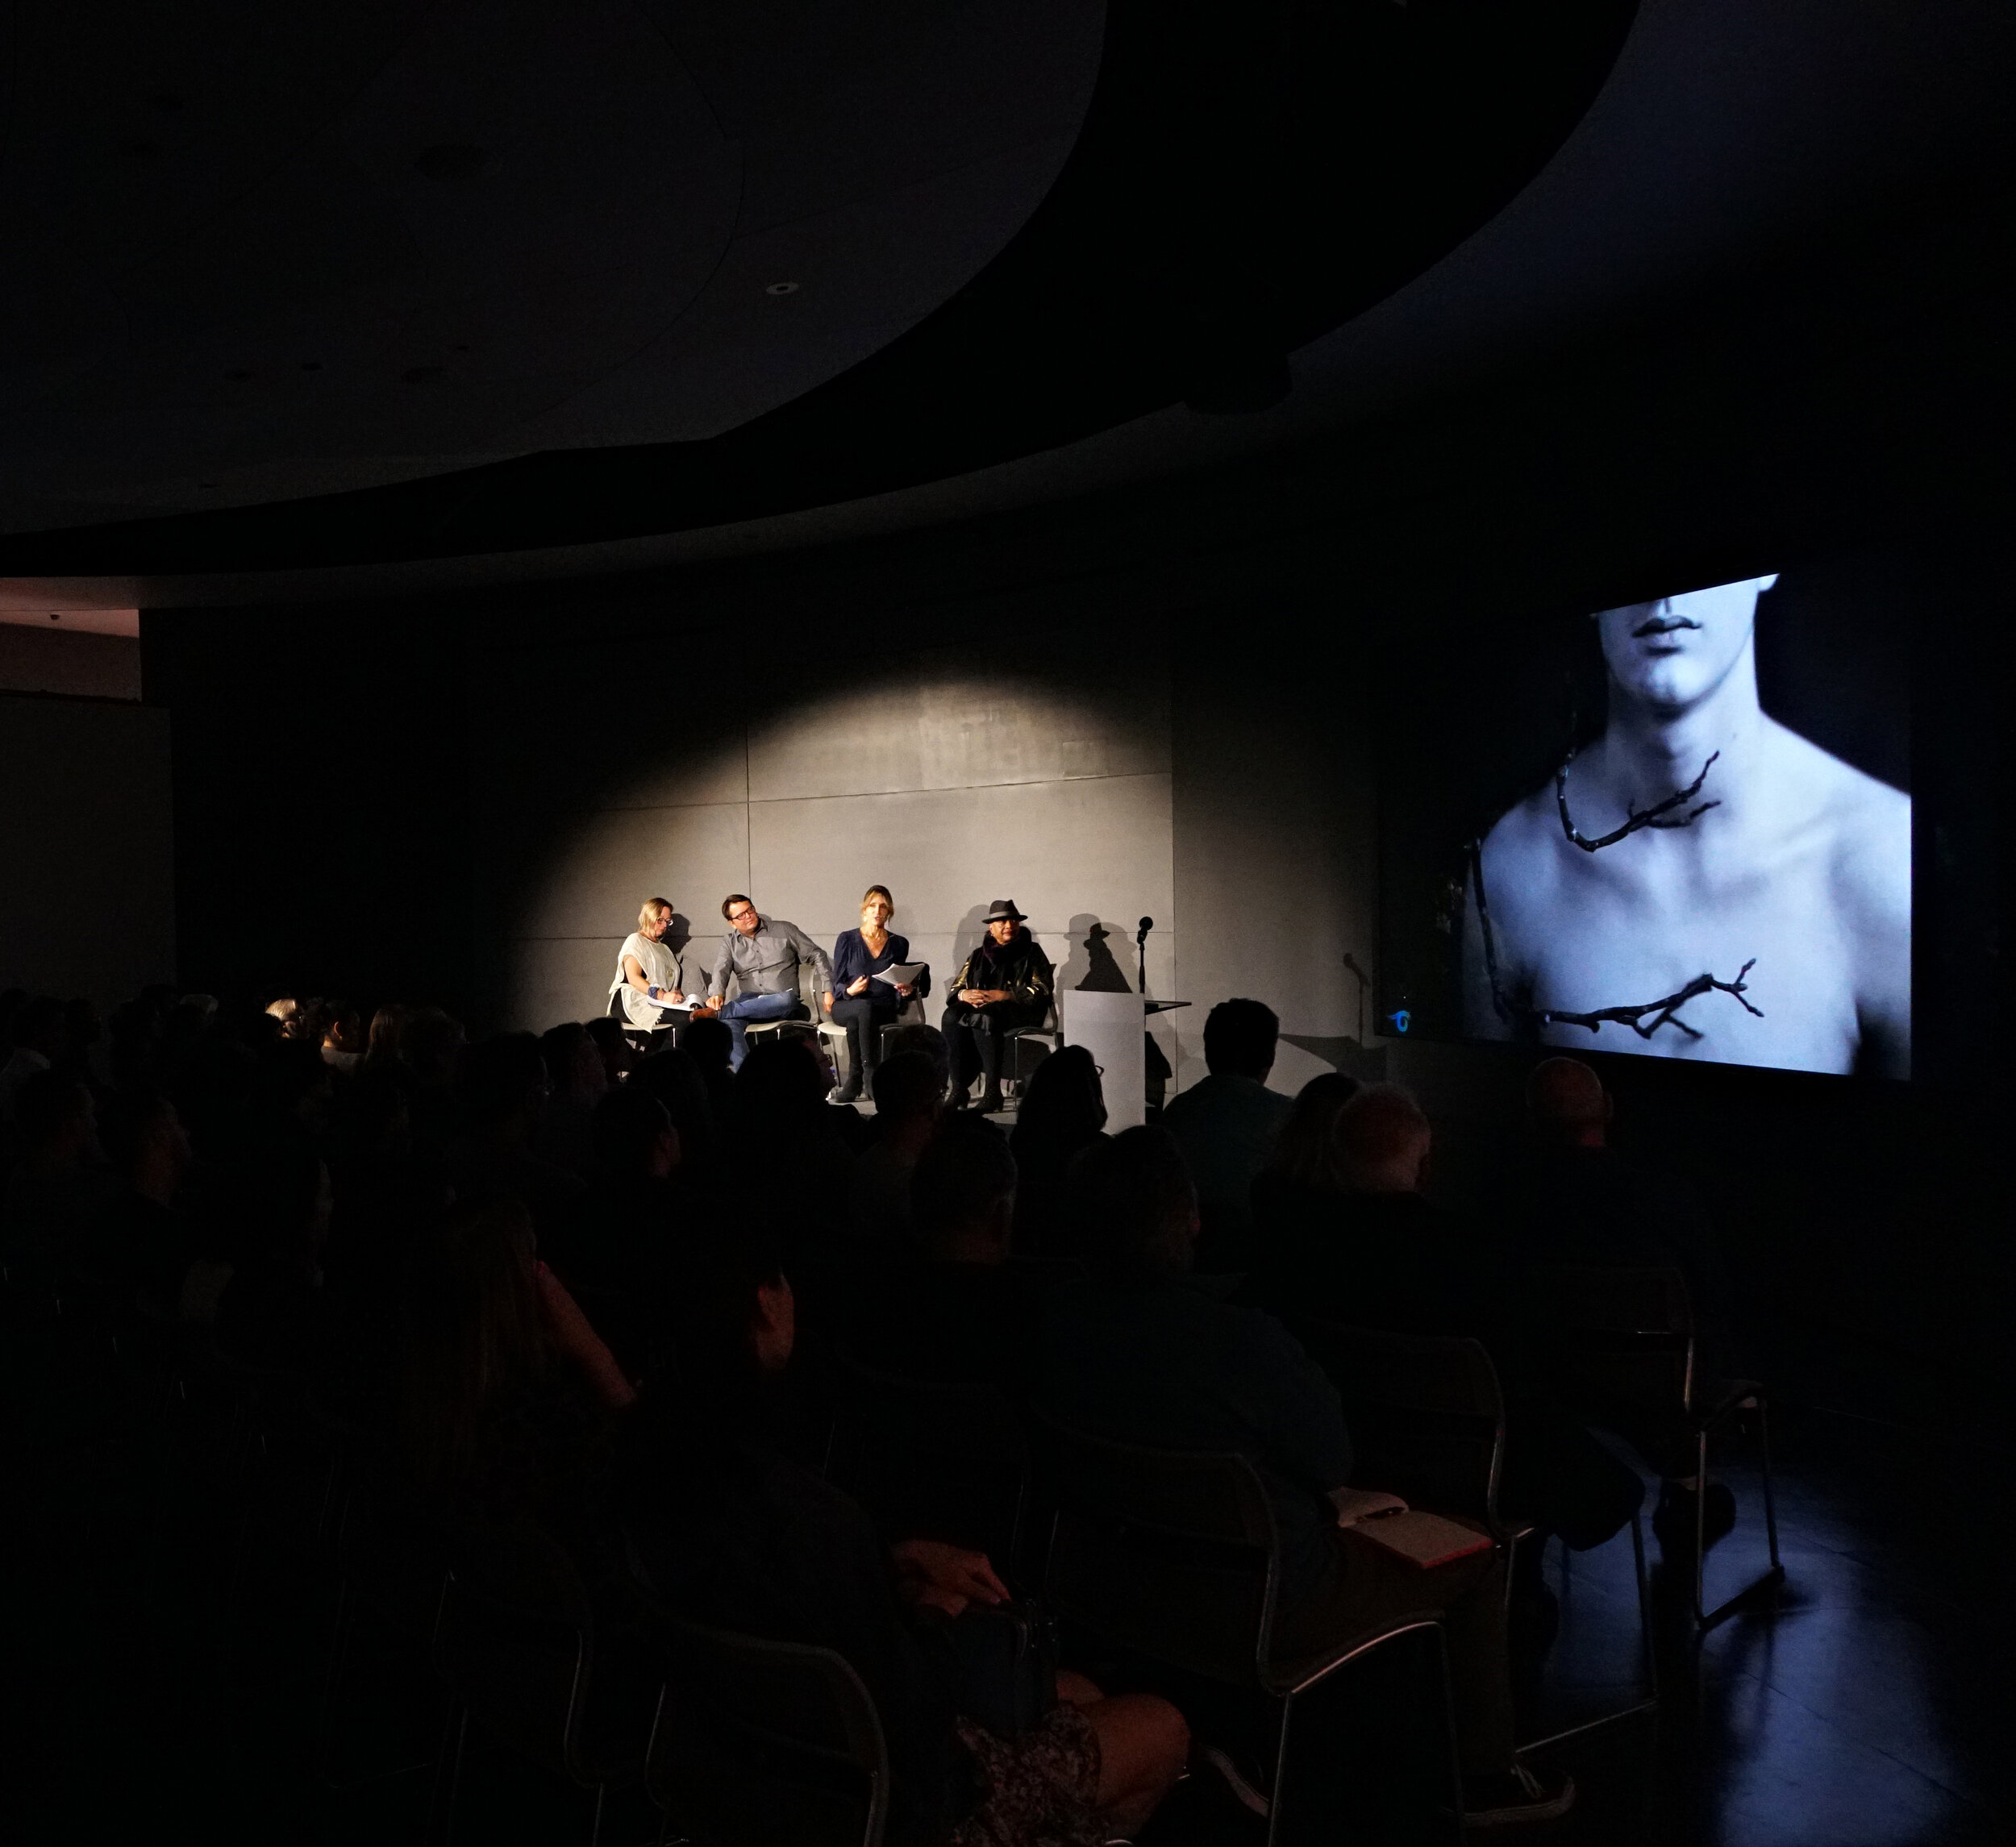  PANEL DISCUSSION FOR THE W/ALL, DEFEND, DIVIDE, AND THE DIVINE EXHIBITION AT THE ANNENBERG SPACE FOR PHOTOGRAPHY, WITH JEN EDWARDS, Ph.D., DEBORAH WILLIS, Ph.D., AND TONY DEL LOS REYES, 2019. 